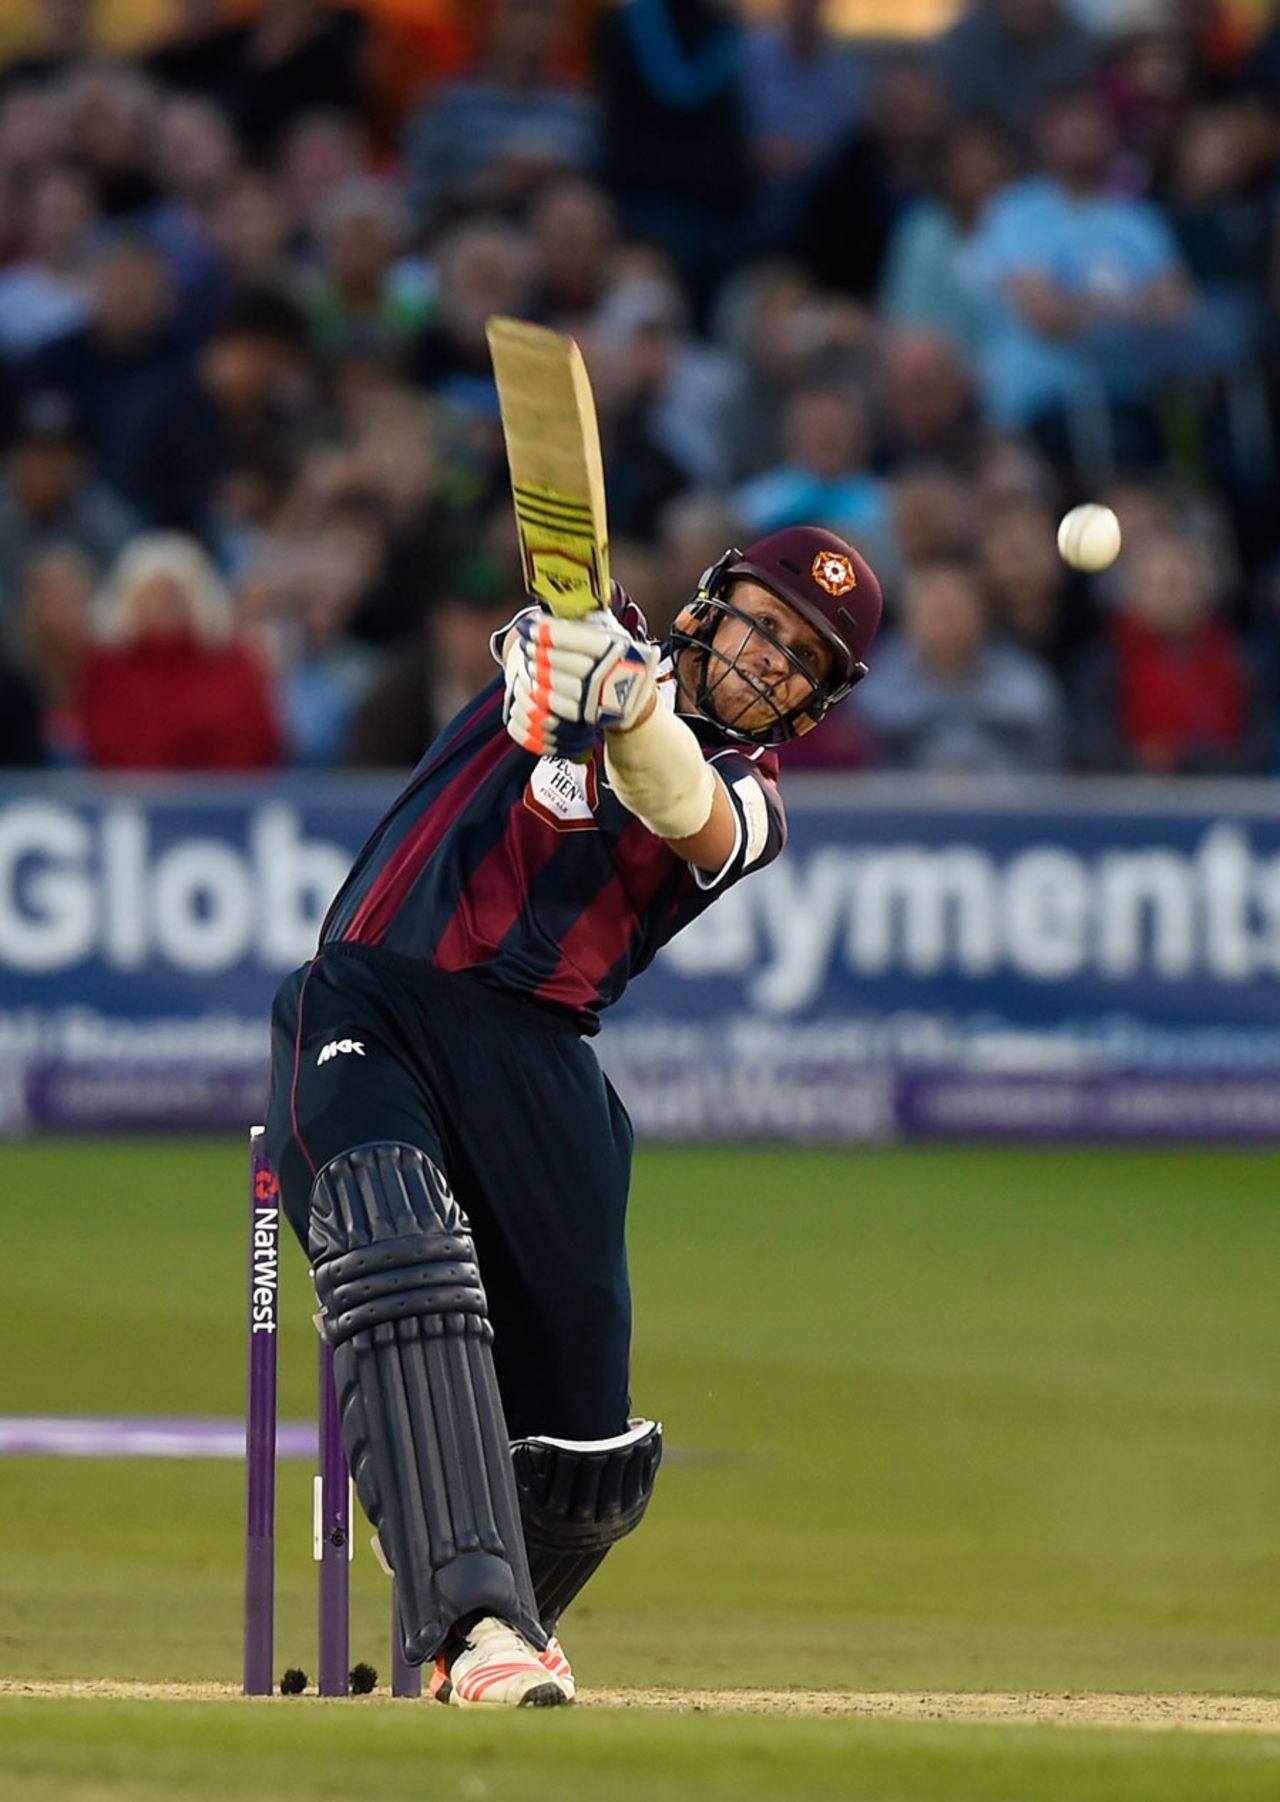 David Willey smashed his way to a half-century off 27 balls, Sussex v Northamptonshire, NatWest T20 Blast quarter-final, Hove, August 12, 2015